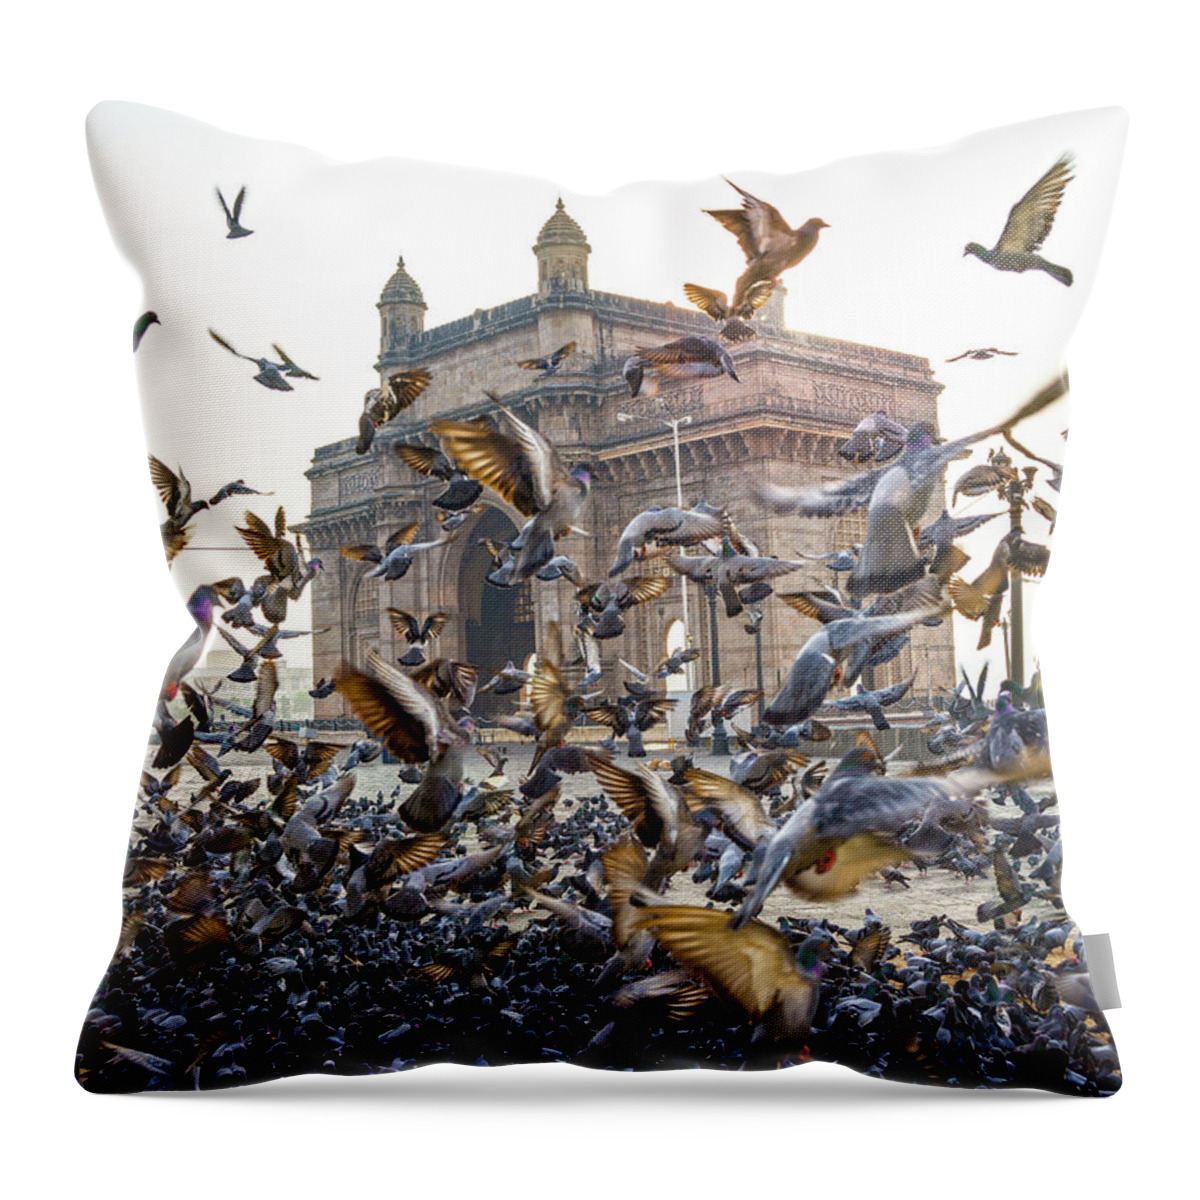 Majestic Throw Pillow featuring the photograph Gateway Of India, Monument, Mumbai by Darren Robb